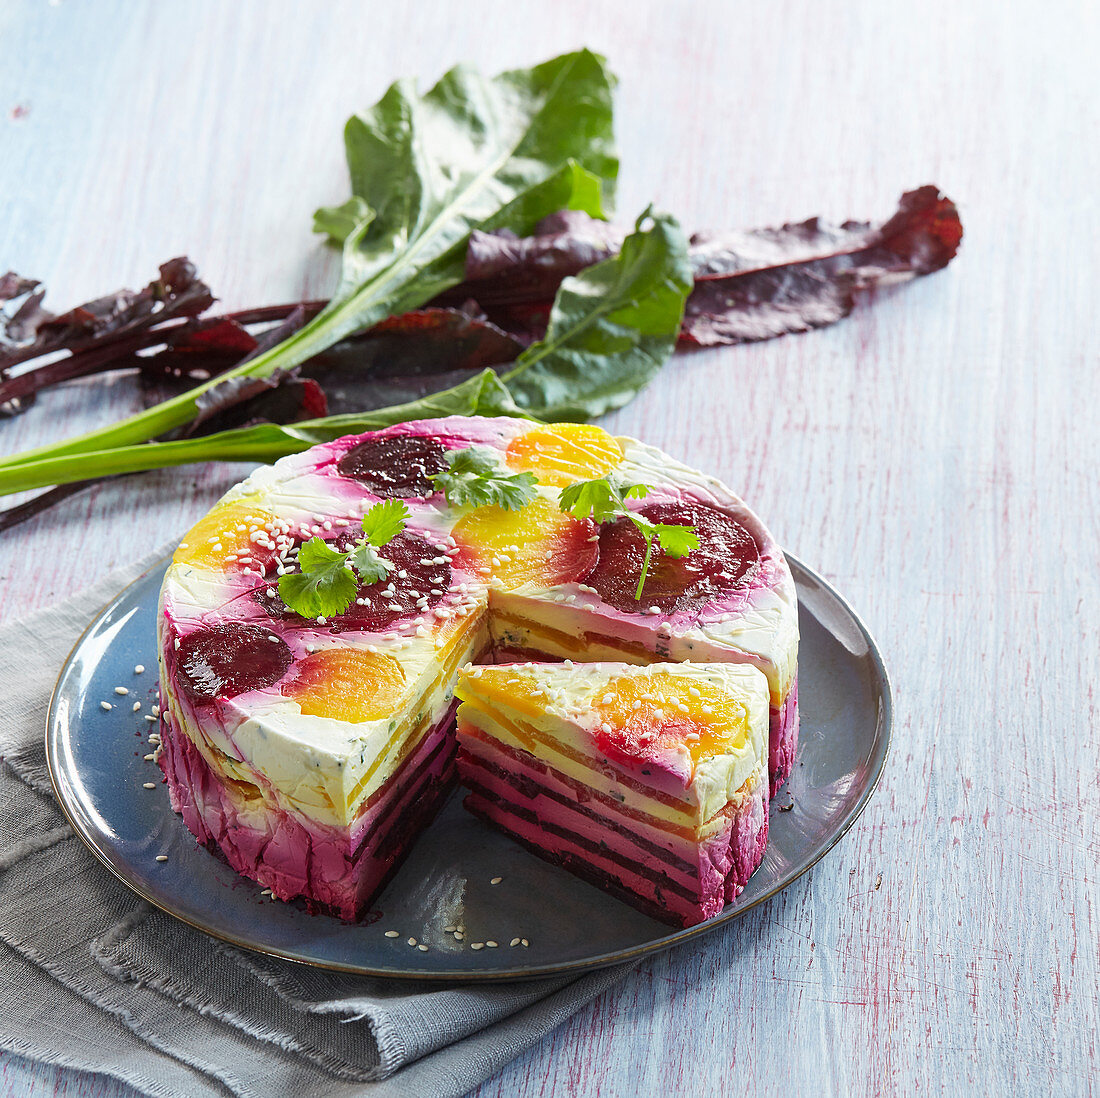 Salty cake with beetroot